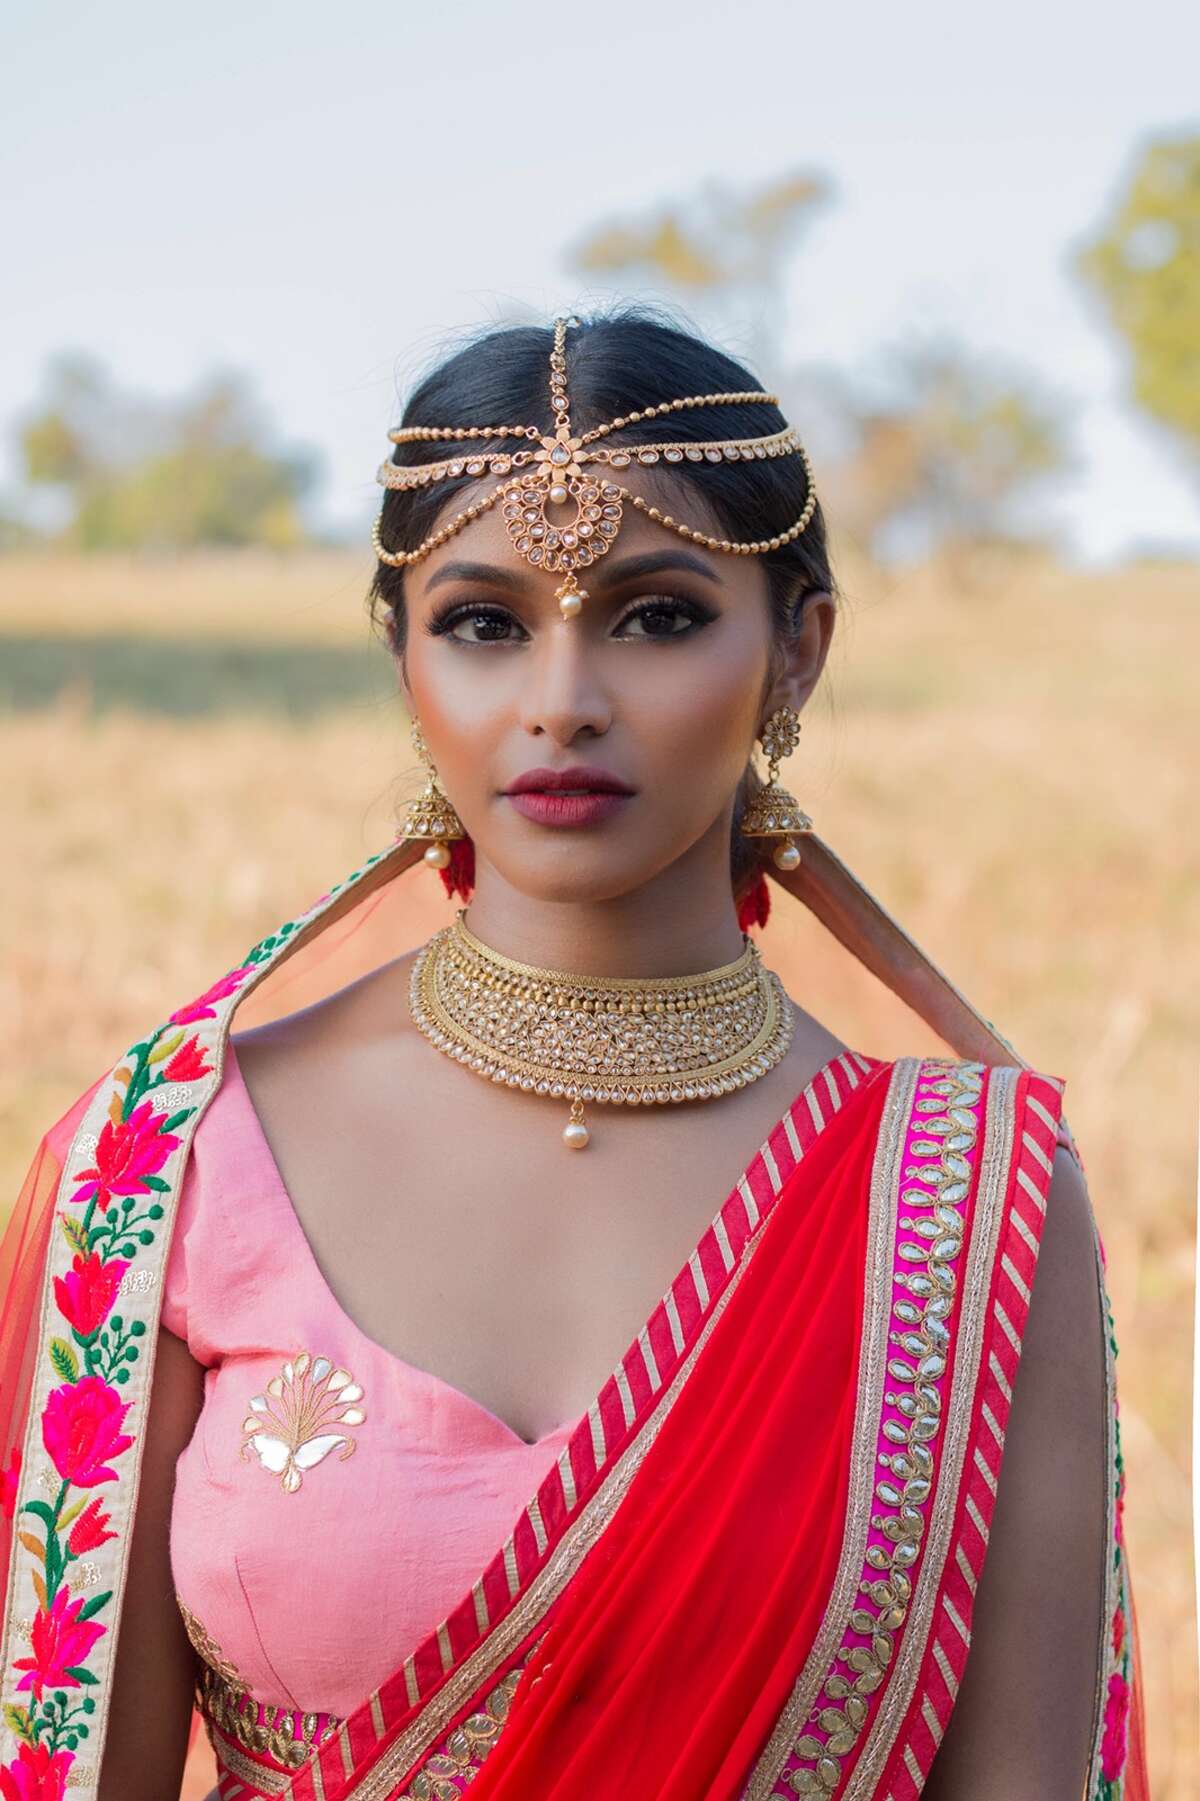 Dallas resident and model Sruthi Jayadevan flawlessly shuts down social media trolls demanding she tones down her Indian style. Her response? More photos appreciating her culture.